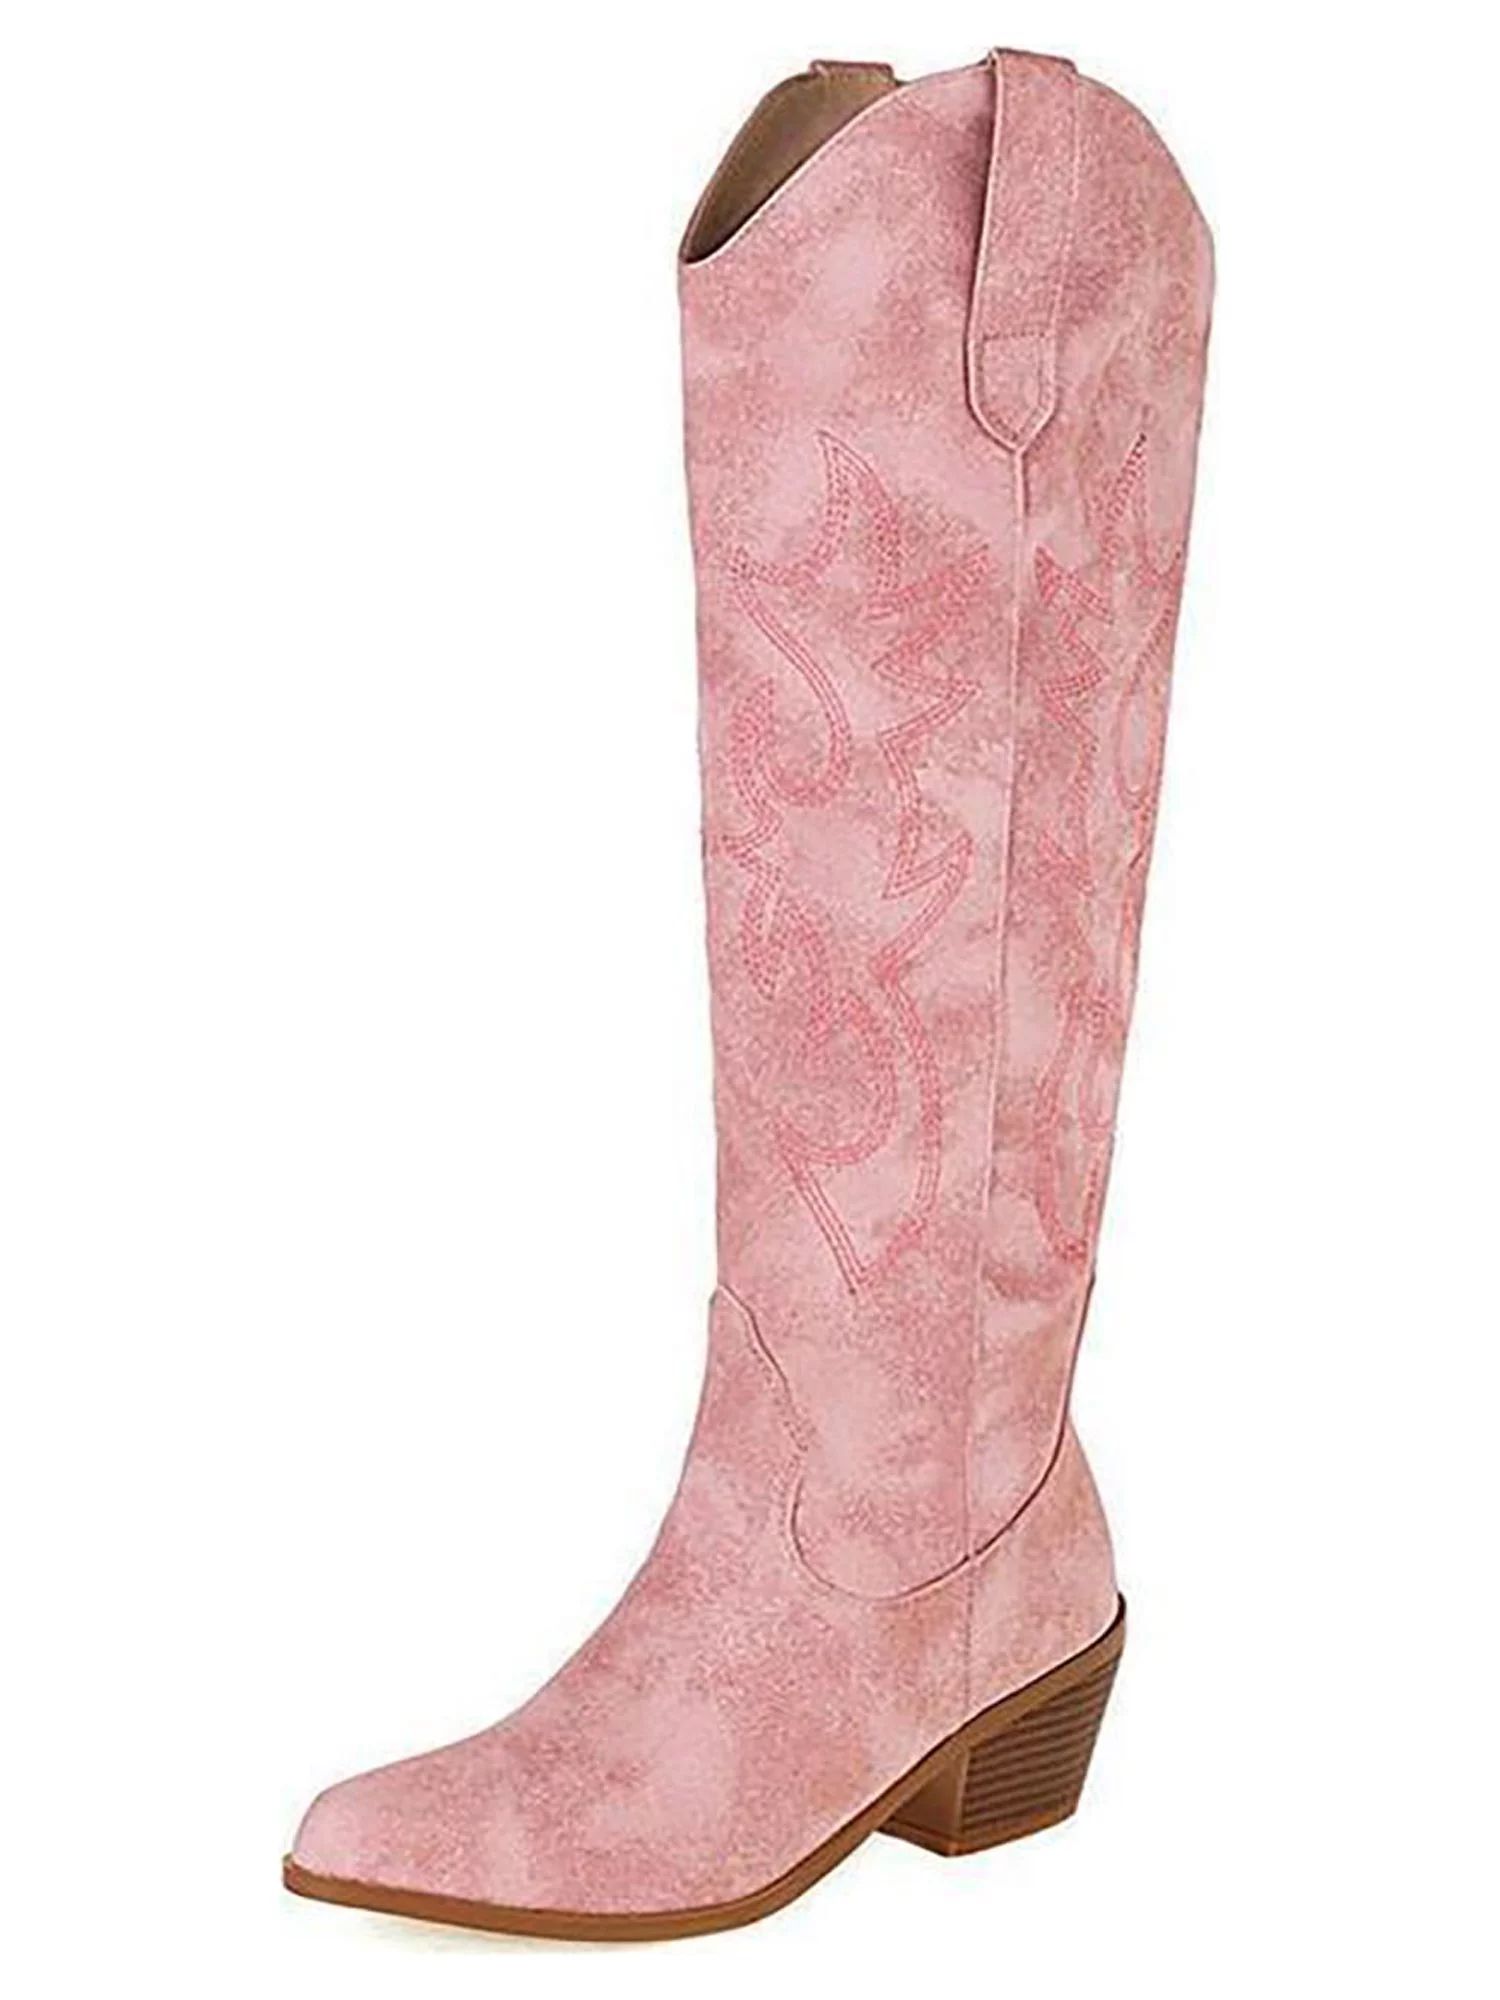 Daeful Cowgirl Boots for Women Embroidered Knee High Cowboy Boots Fashion Pull on Tall Western Bo... | Walmart (US)